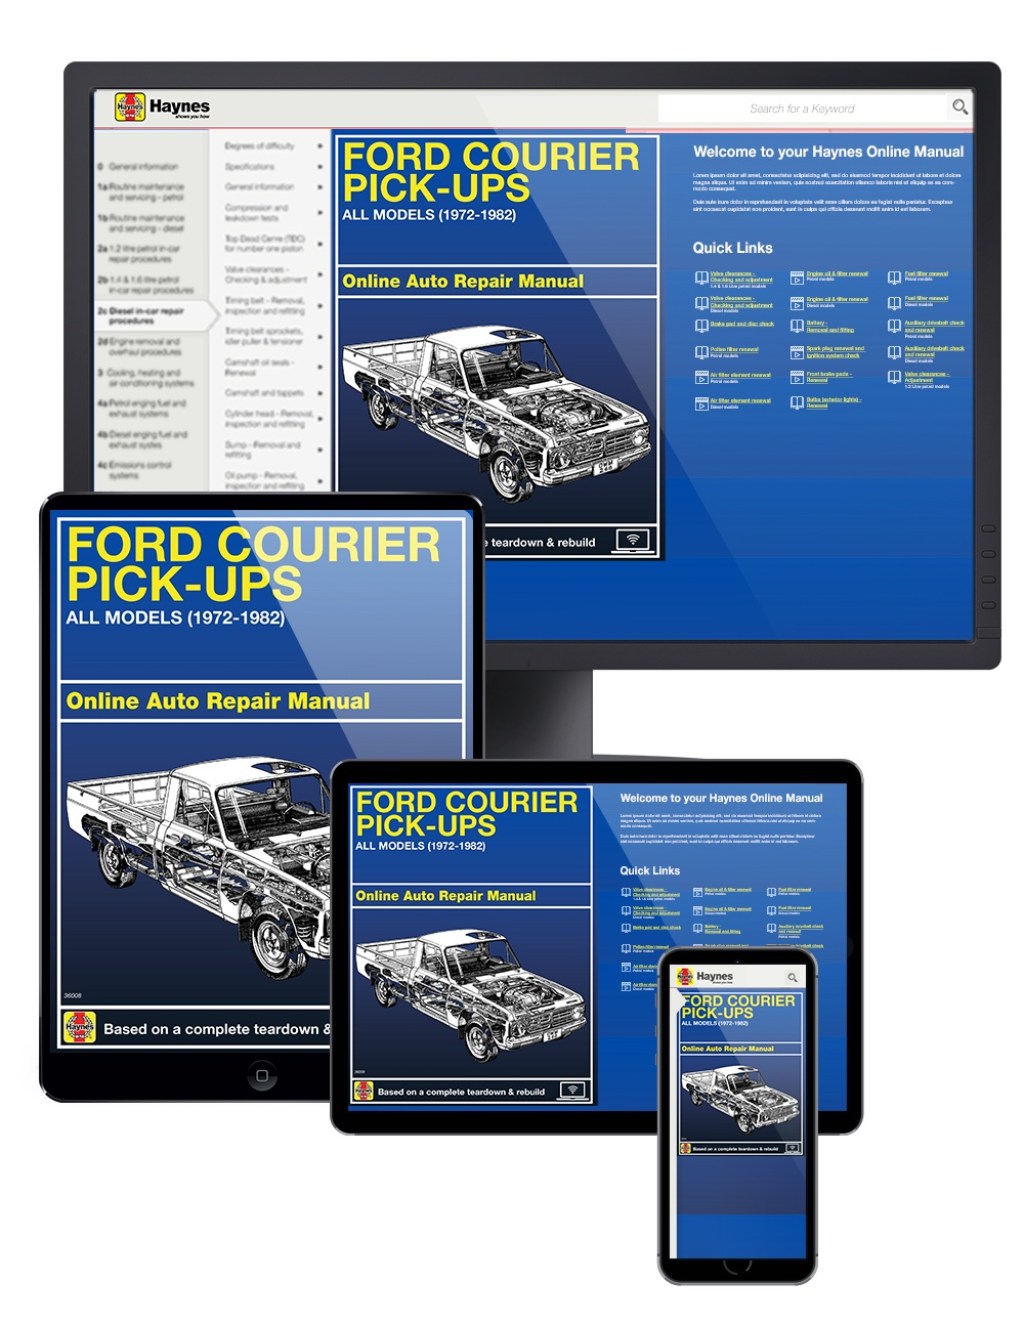 Picture of: Ford Courier Pick-ups (-) Haynes Online Manual